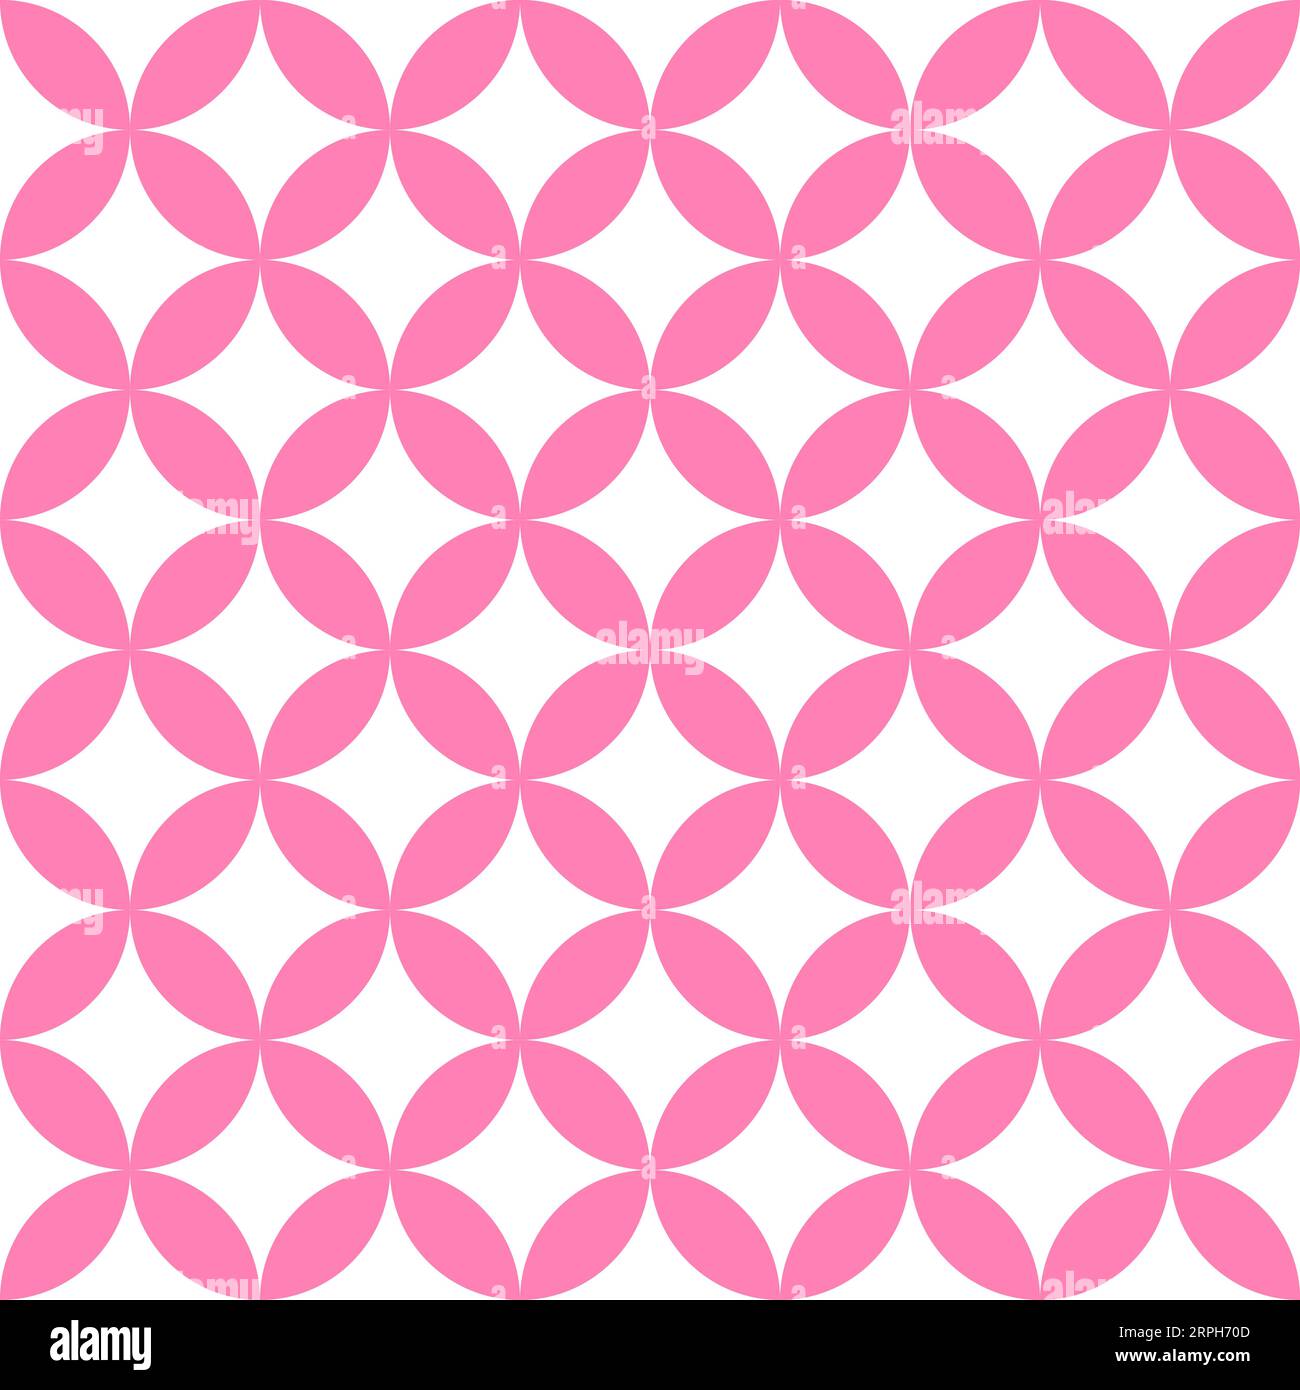 Pink on white cute geometric pattern. Overlapping circles and ovals abstract retro fashion texture. Seamless pattern. Stock Vector